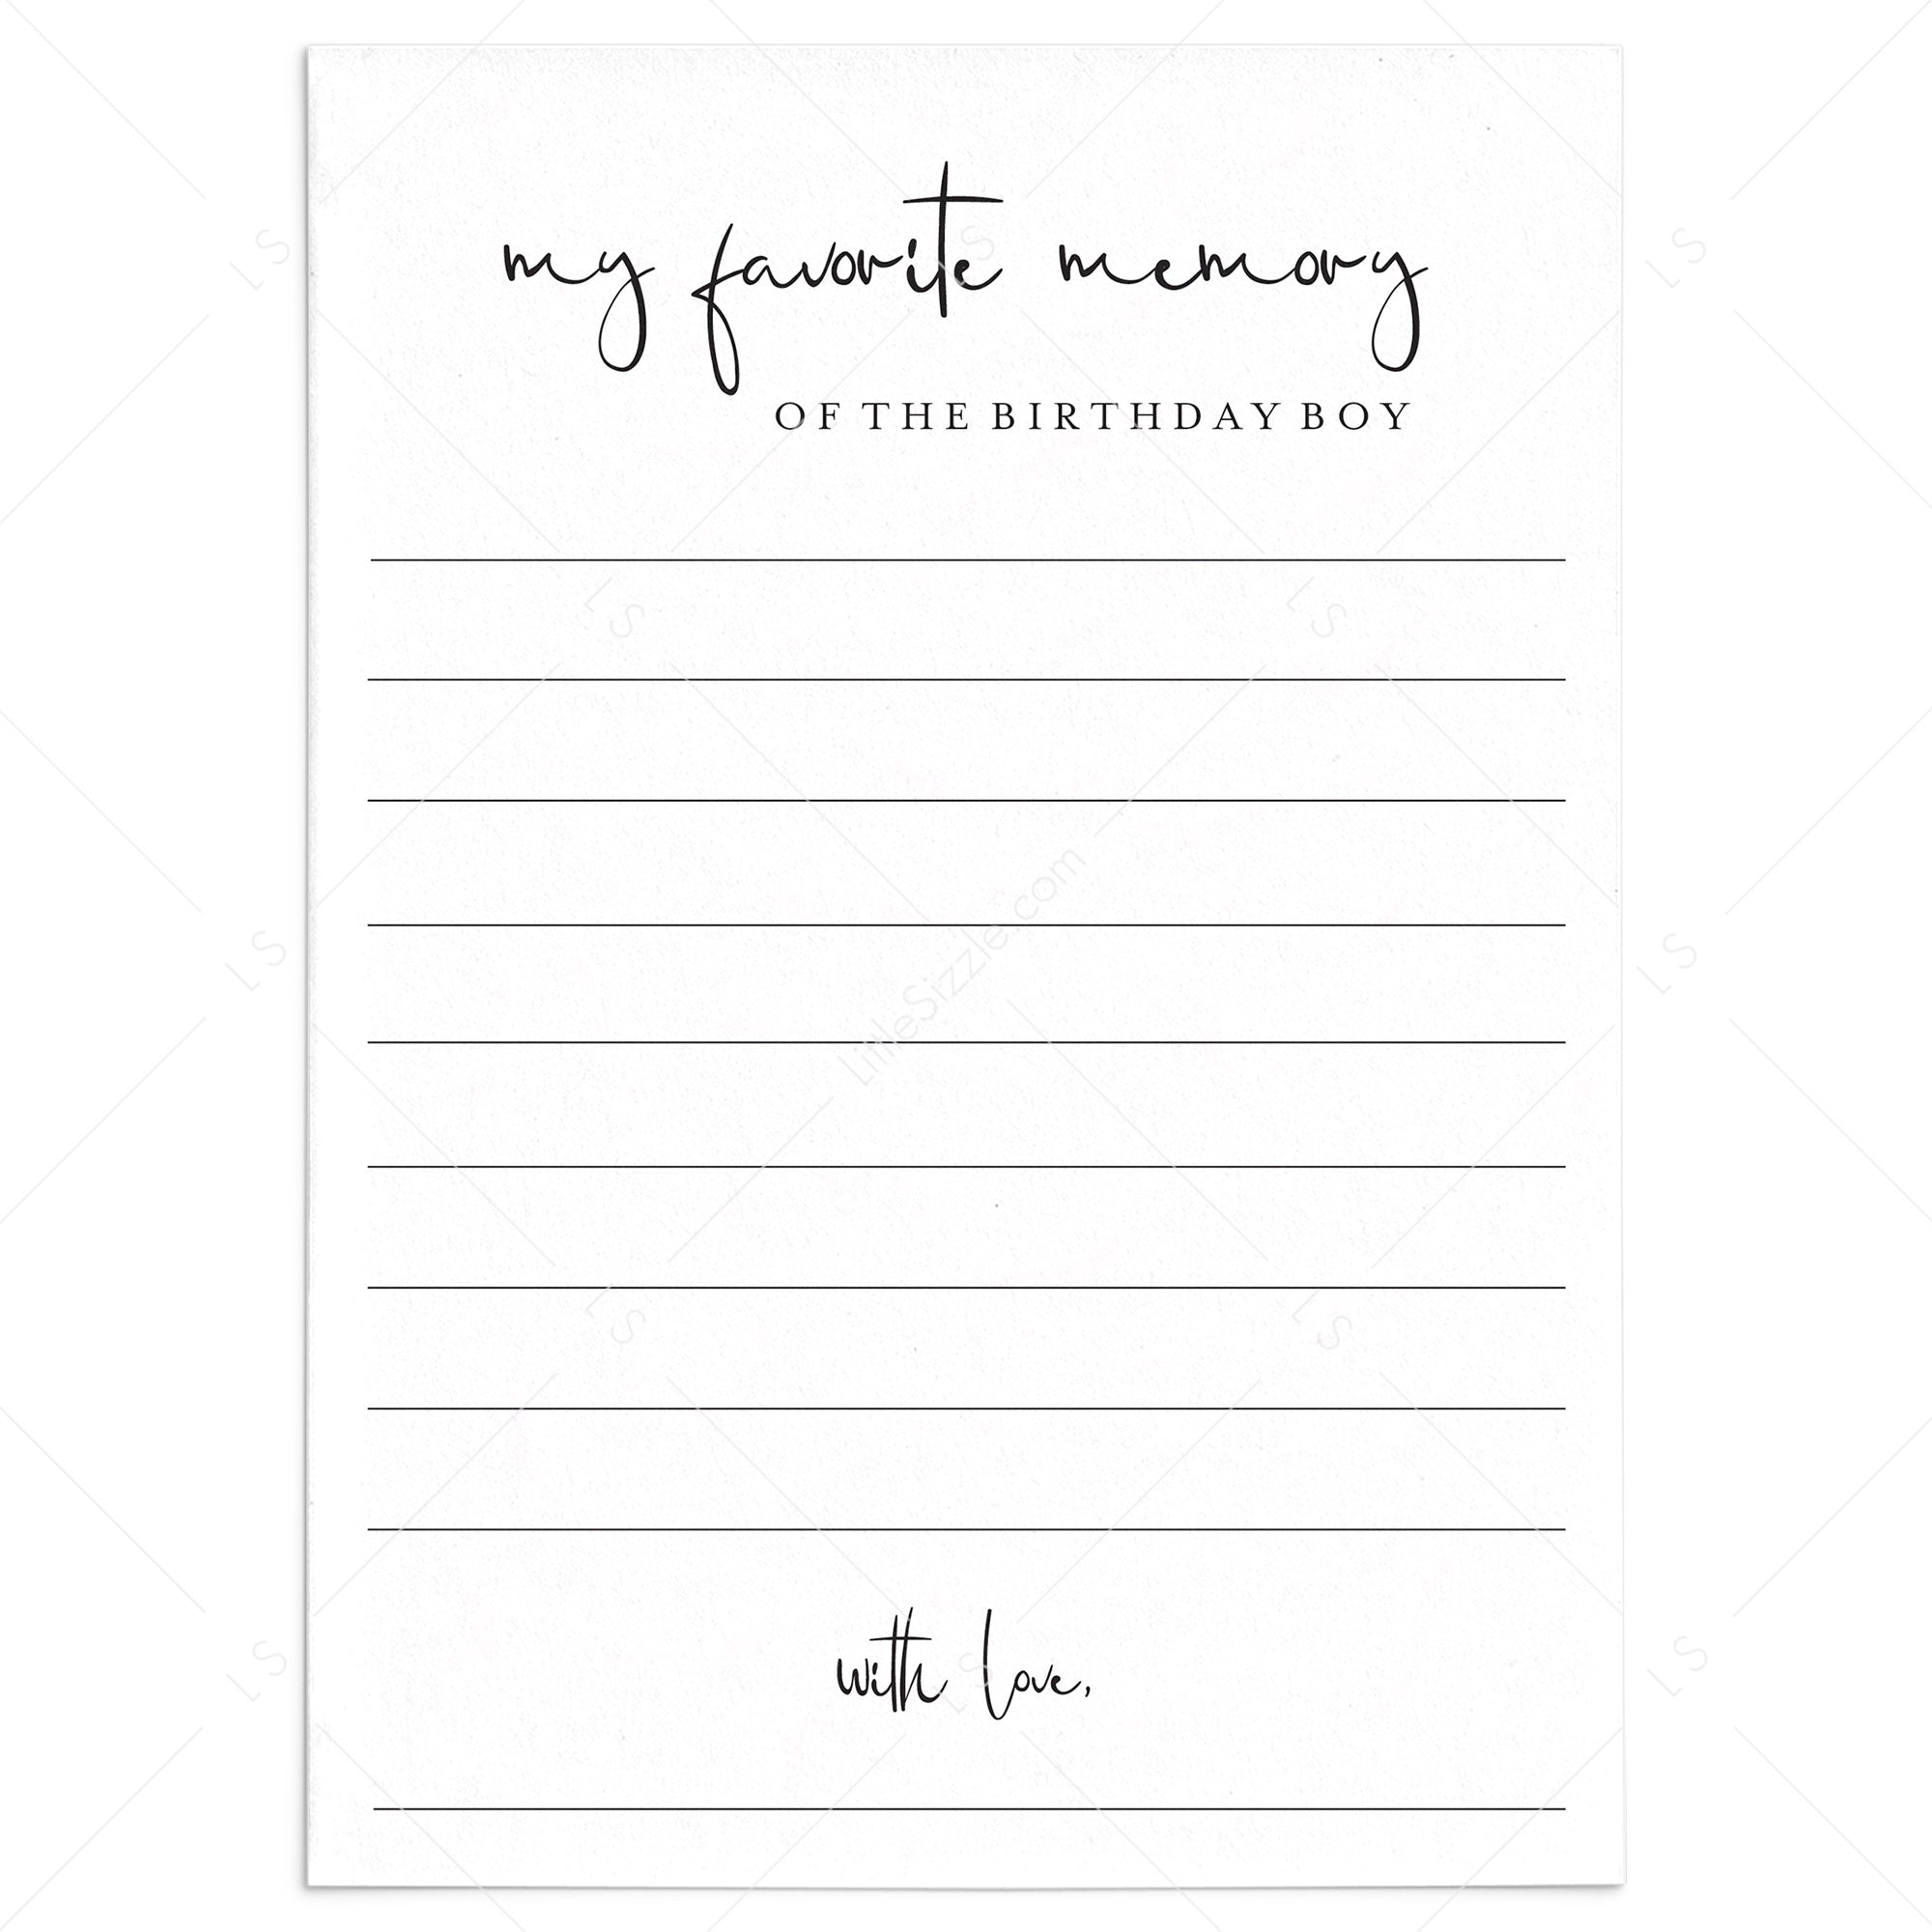 Share Your Favorite Memory Of The Birthday Boy Cards Printable by LittleSizzle